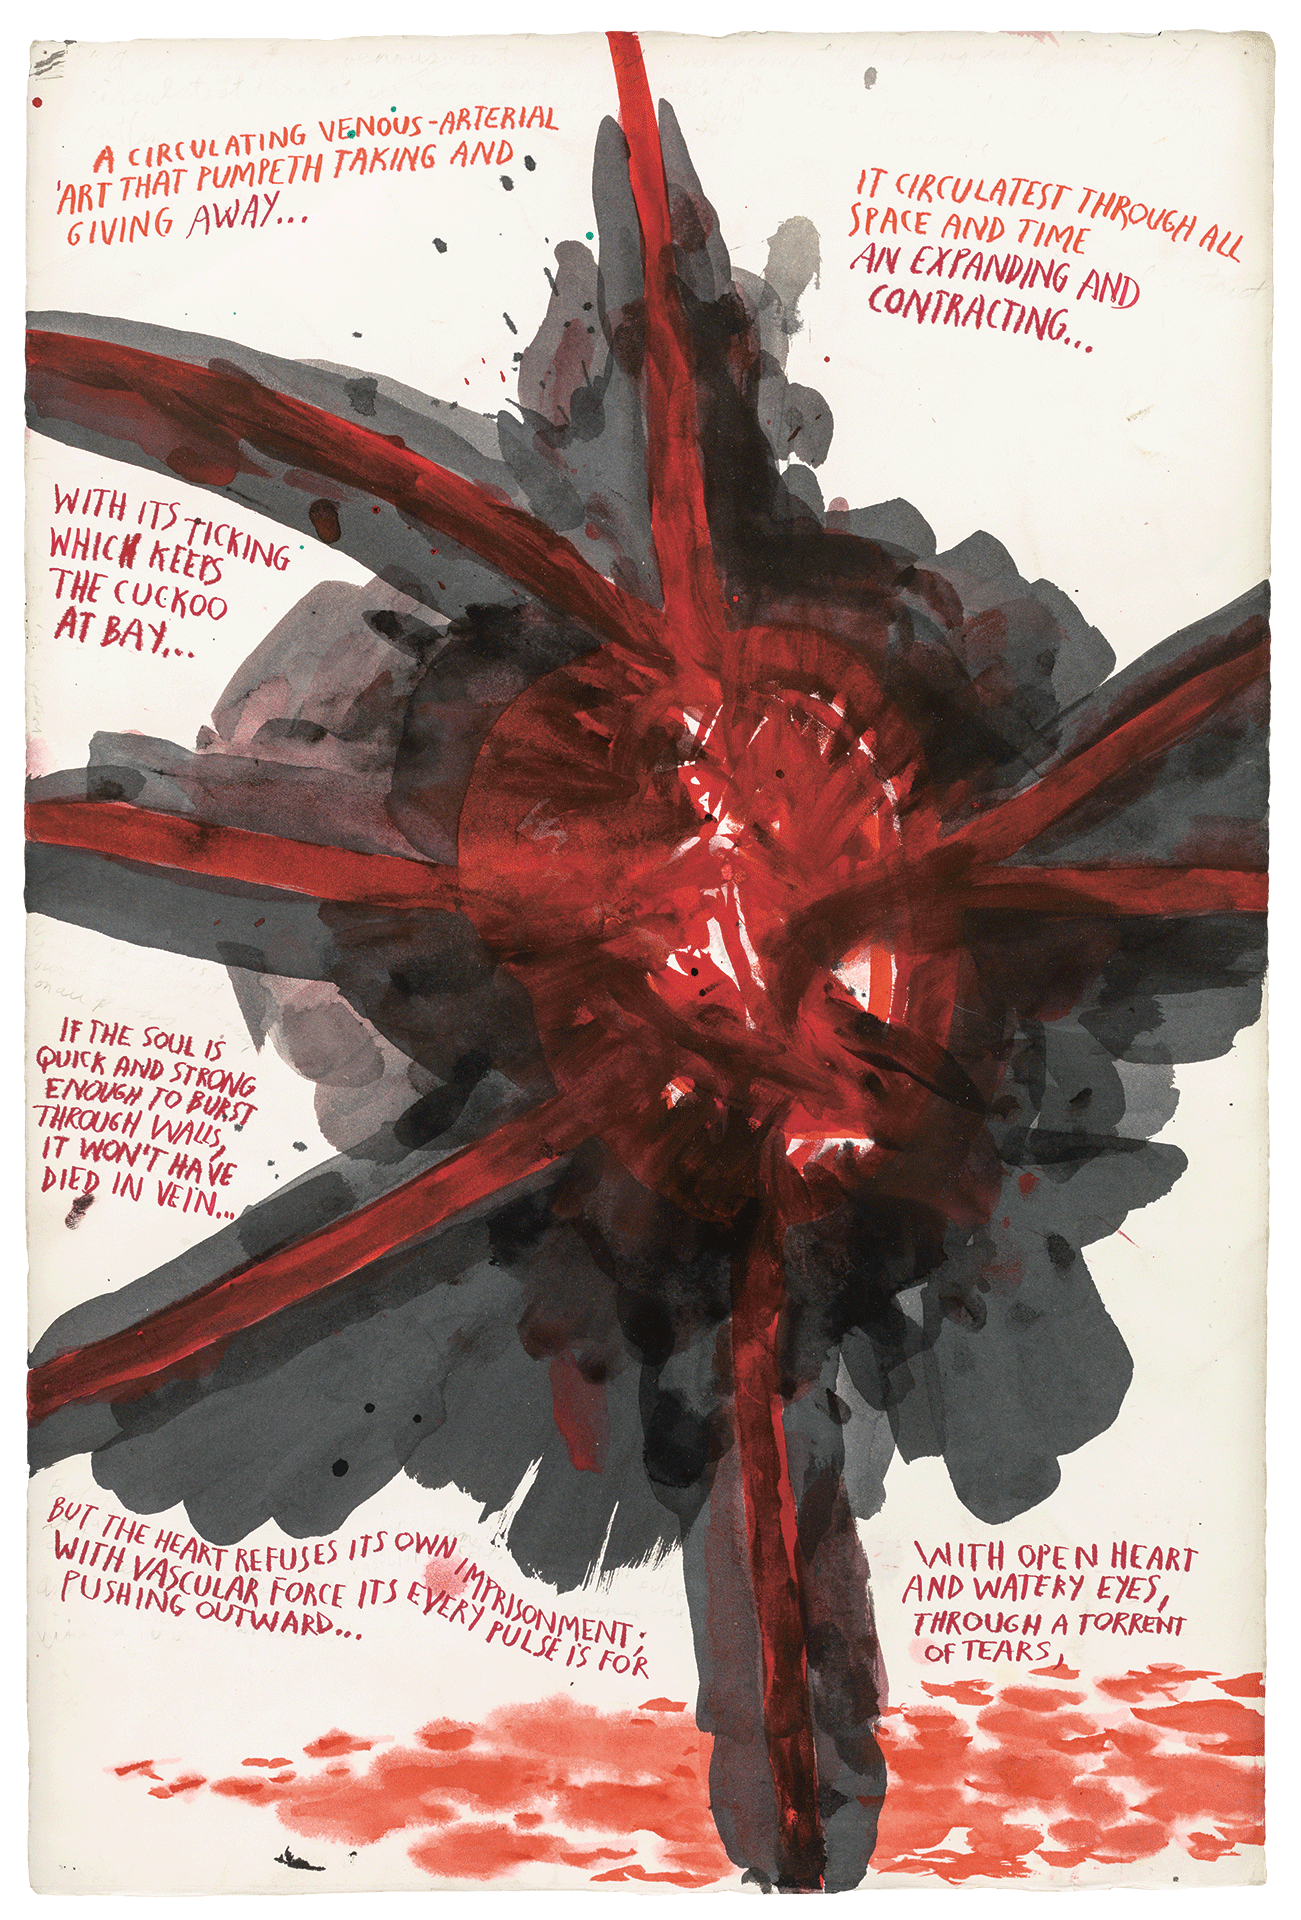 A drawing by Raymond Pettibon titled No Title (A circulating venous-arterial...), dated 2003.